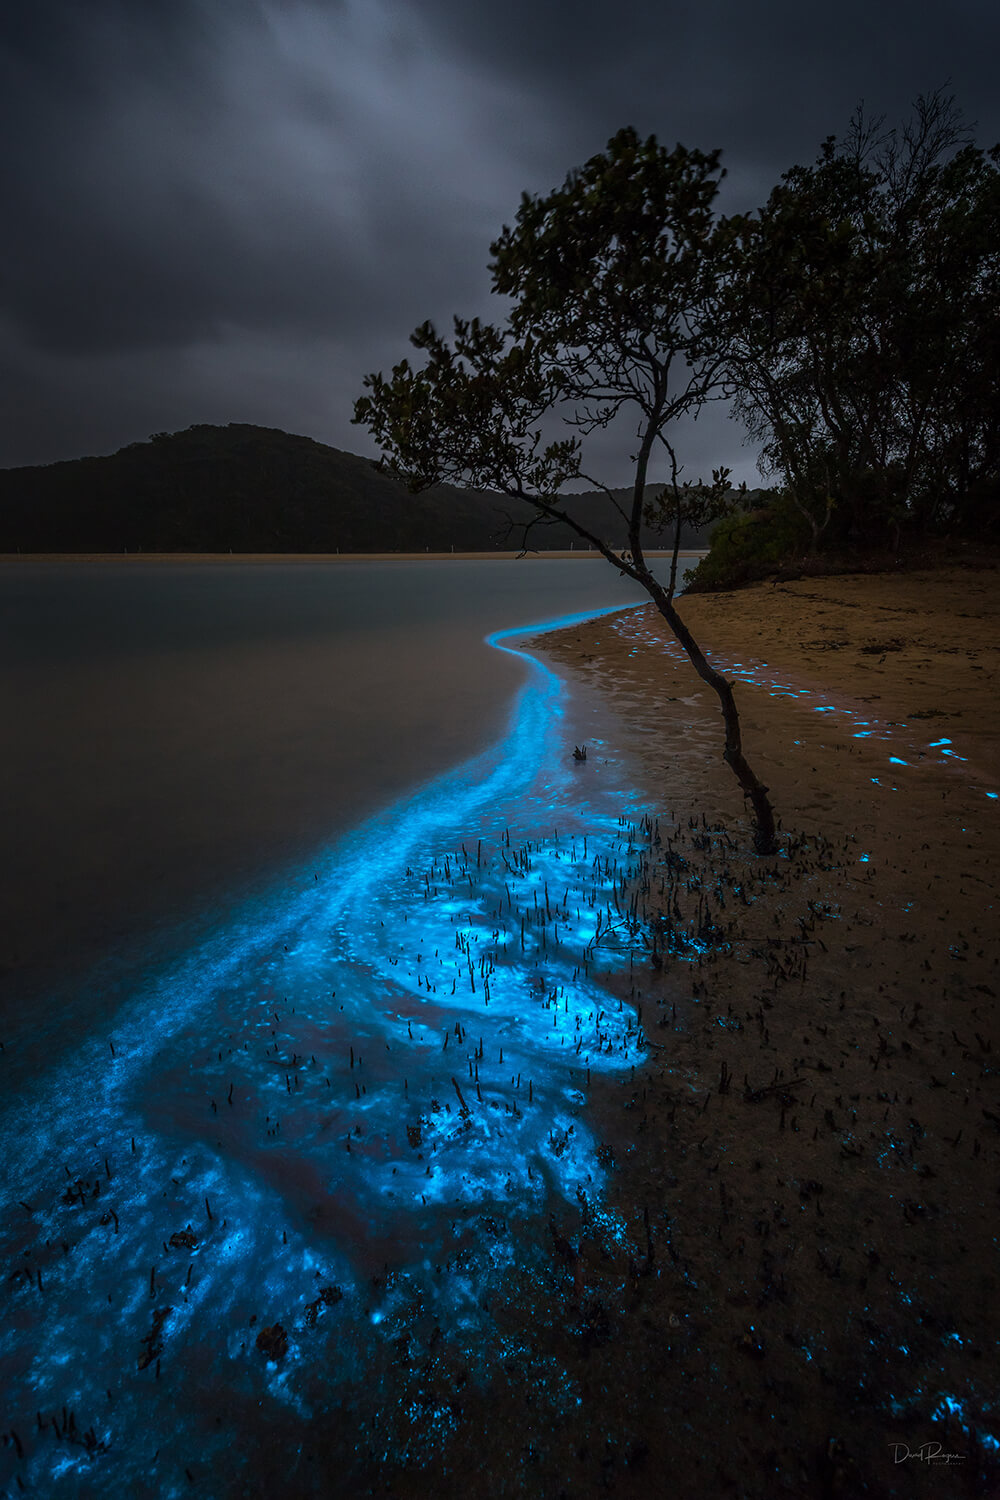 Bioluminescence photo shot on a EOS 6D Mark II and EF 16-35mm f/4L IS USM Lens by Davey Rogers